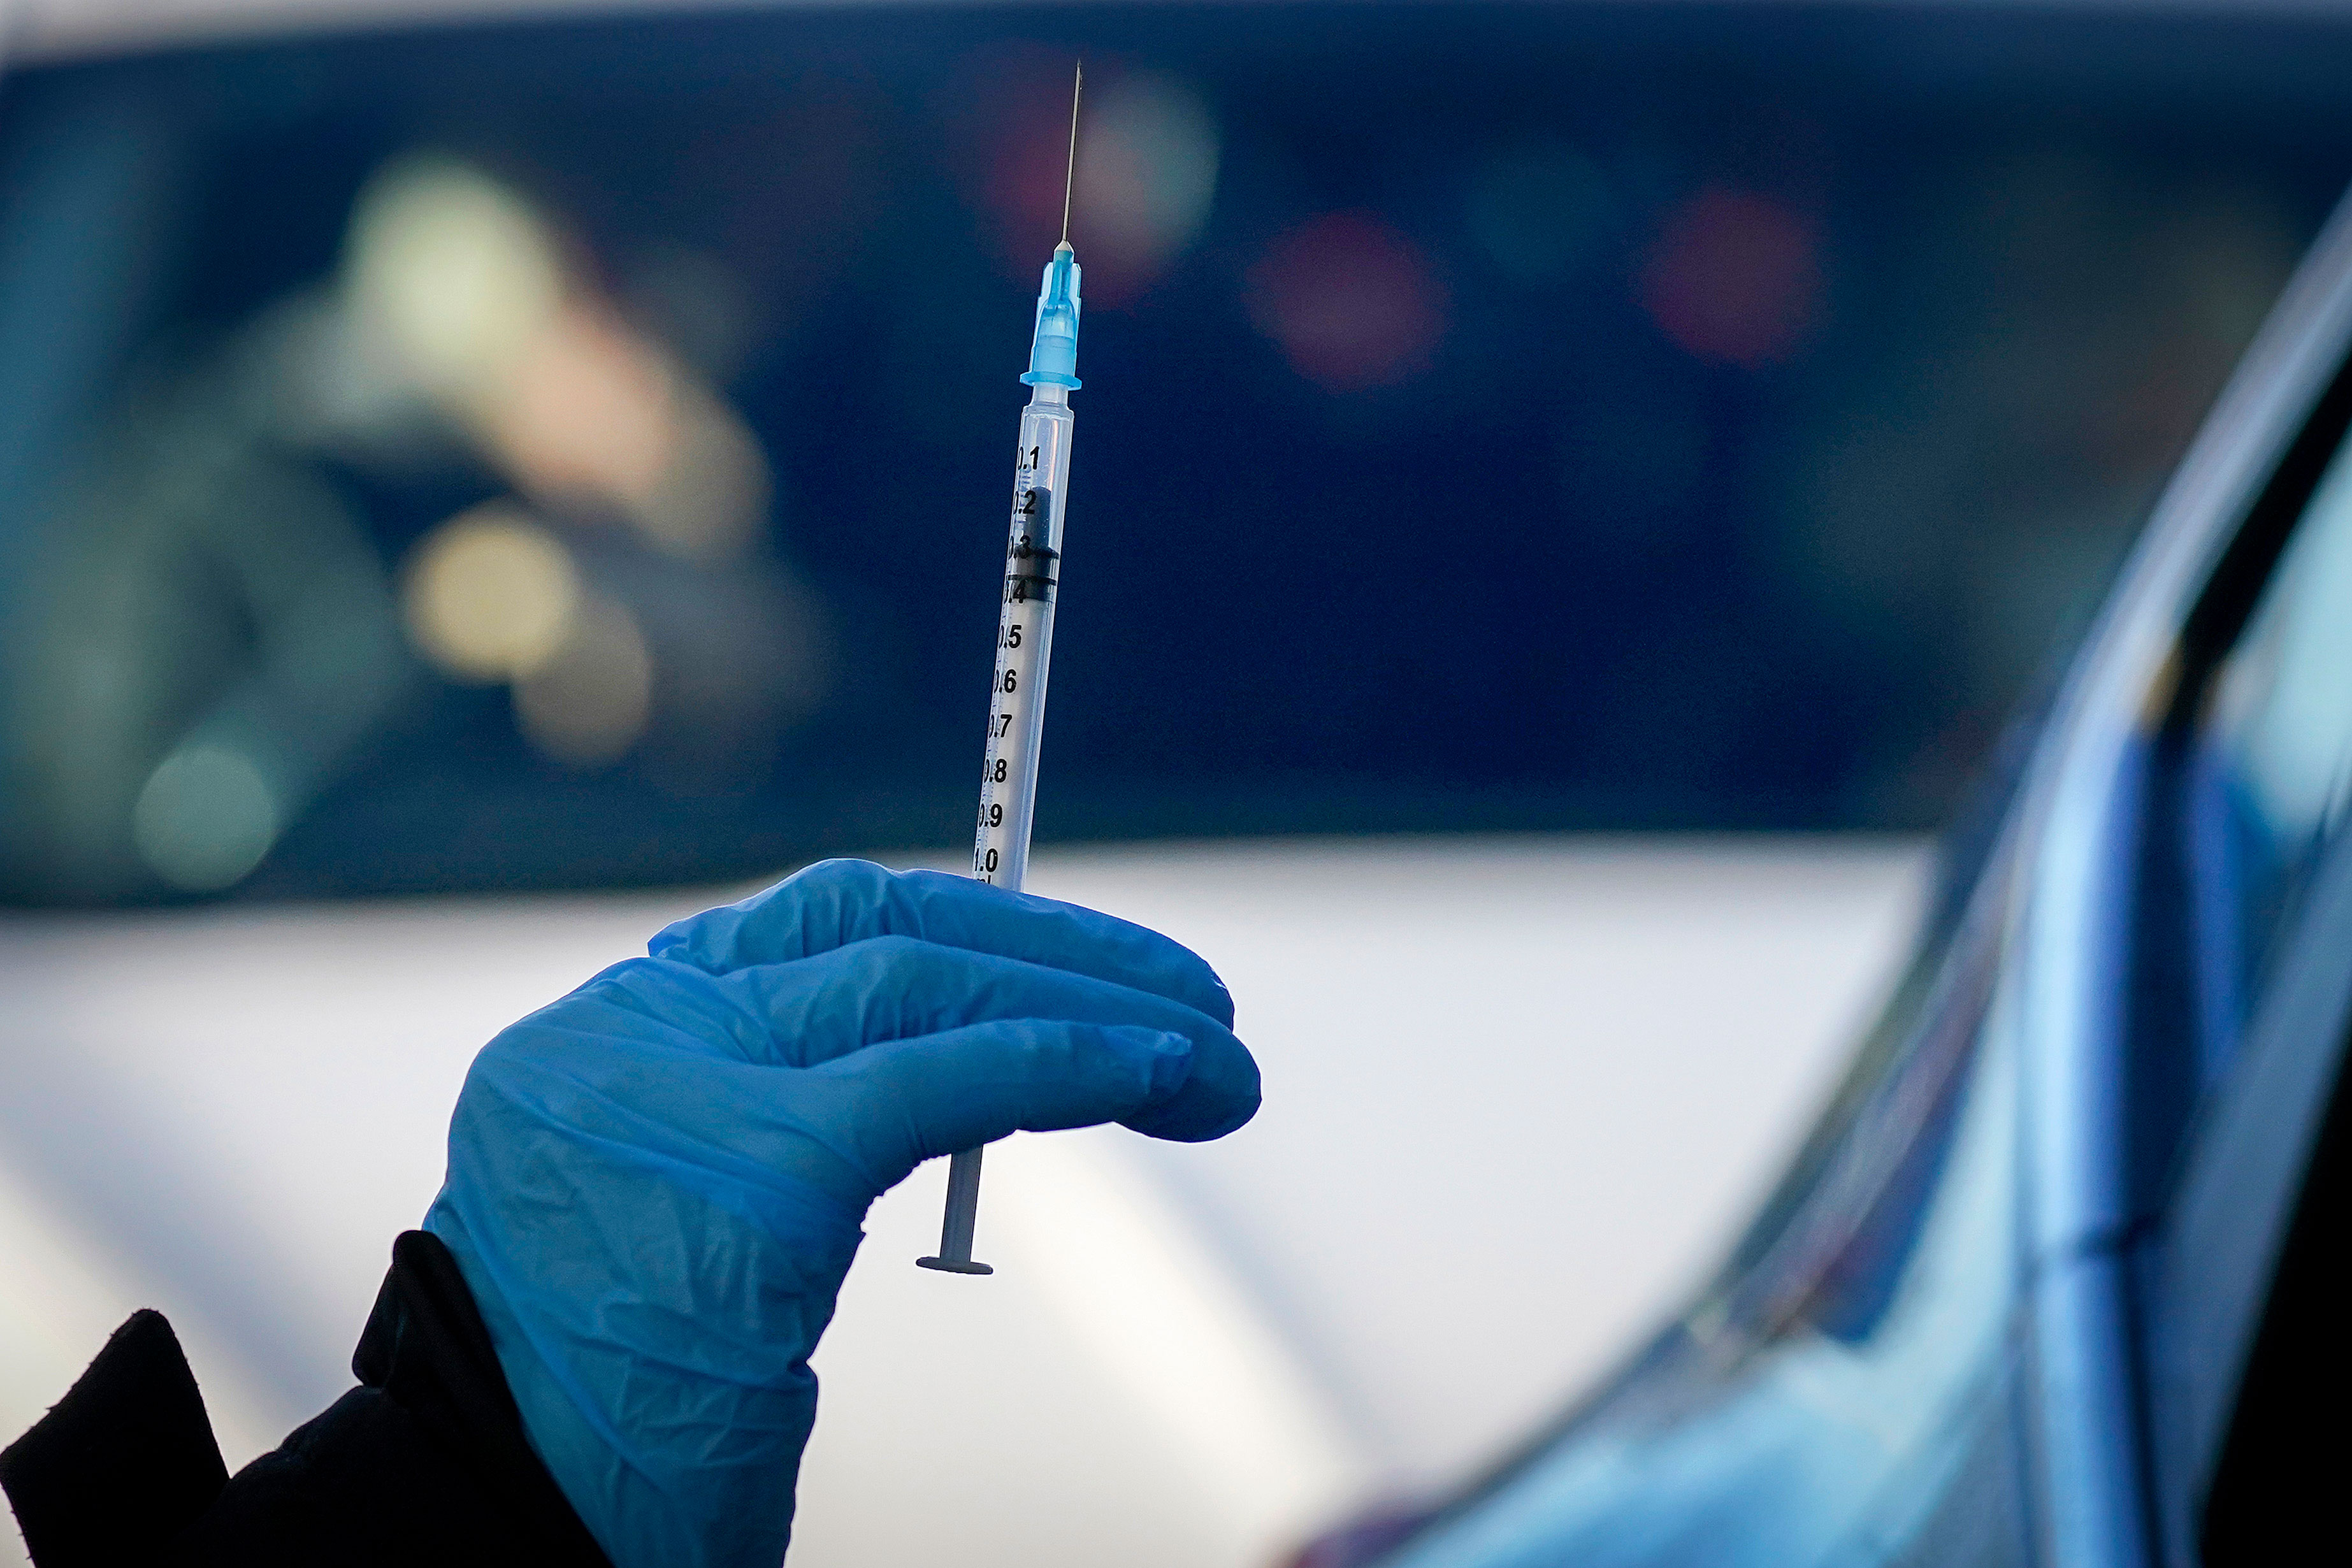 A nurse in Manchester, England, prepares to administer the Pfizer/BioNTech Covid-19 vaccine at a drive-thru vaccination center on December 17.